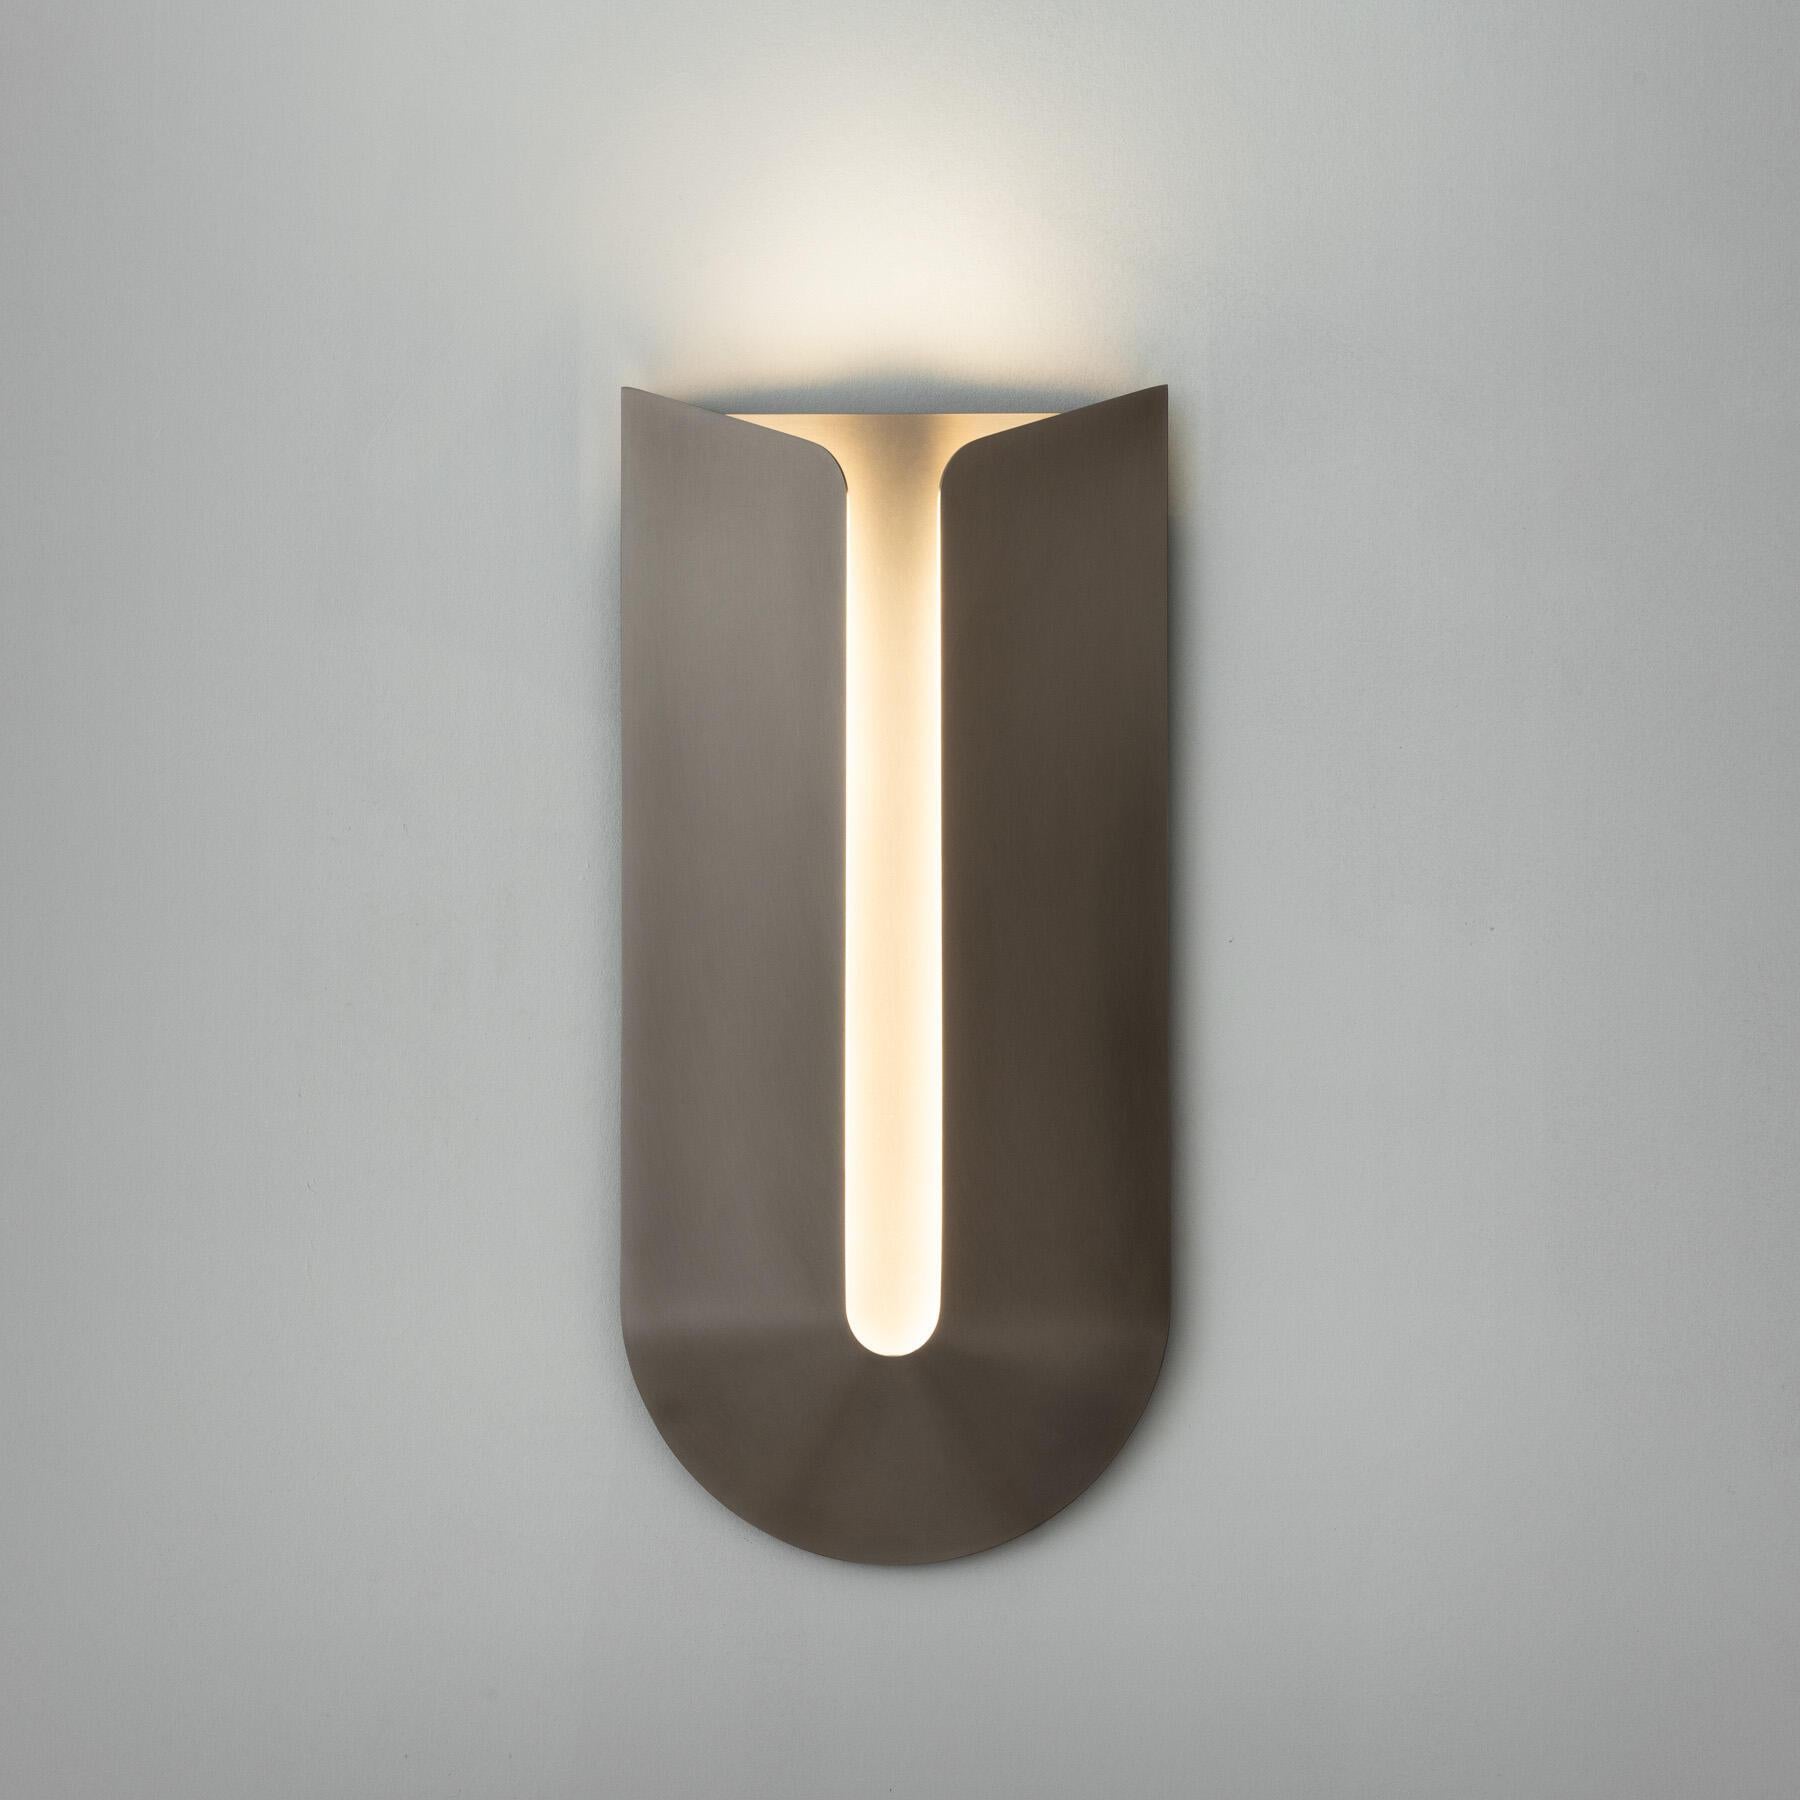 Cove is a low-profile but sizable sconce, with a minimal design that celebrates form and materiality in seemingly endless combinations. Whether mounted to wash light from above or below, the architectural curves of this ADA-compliant piece gently